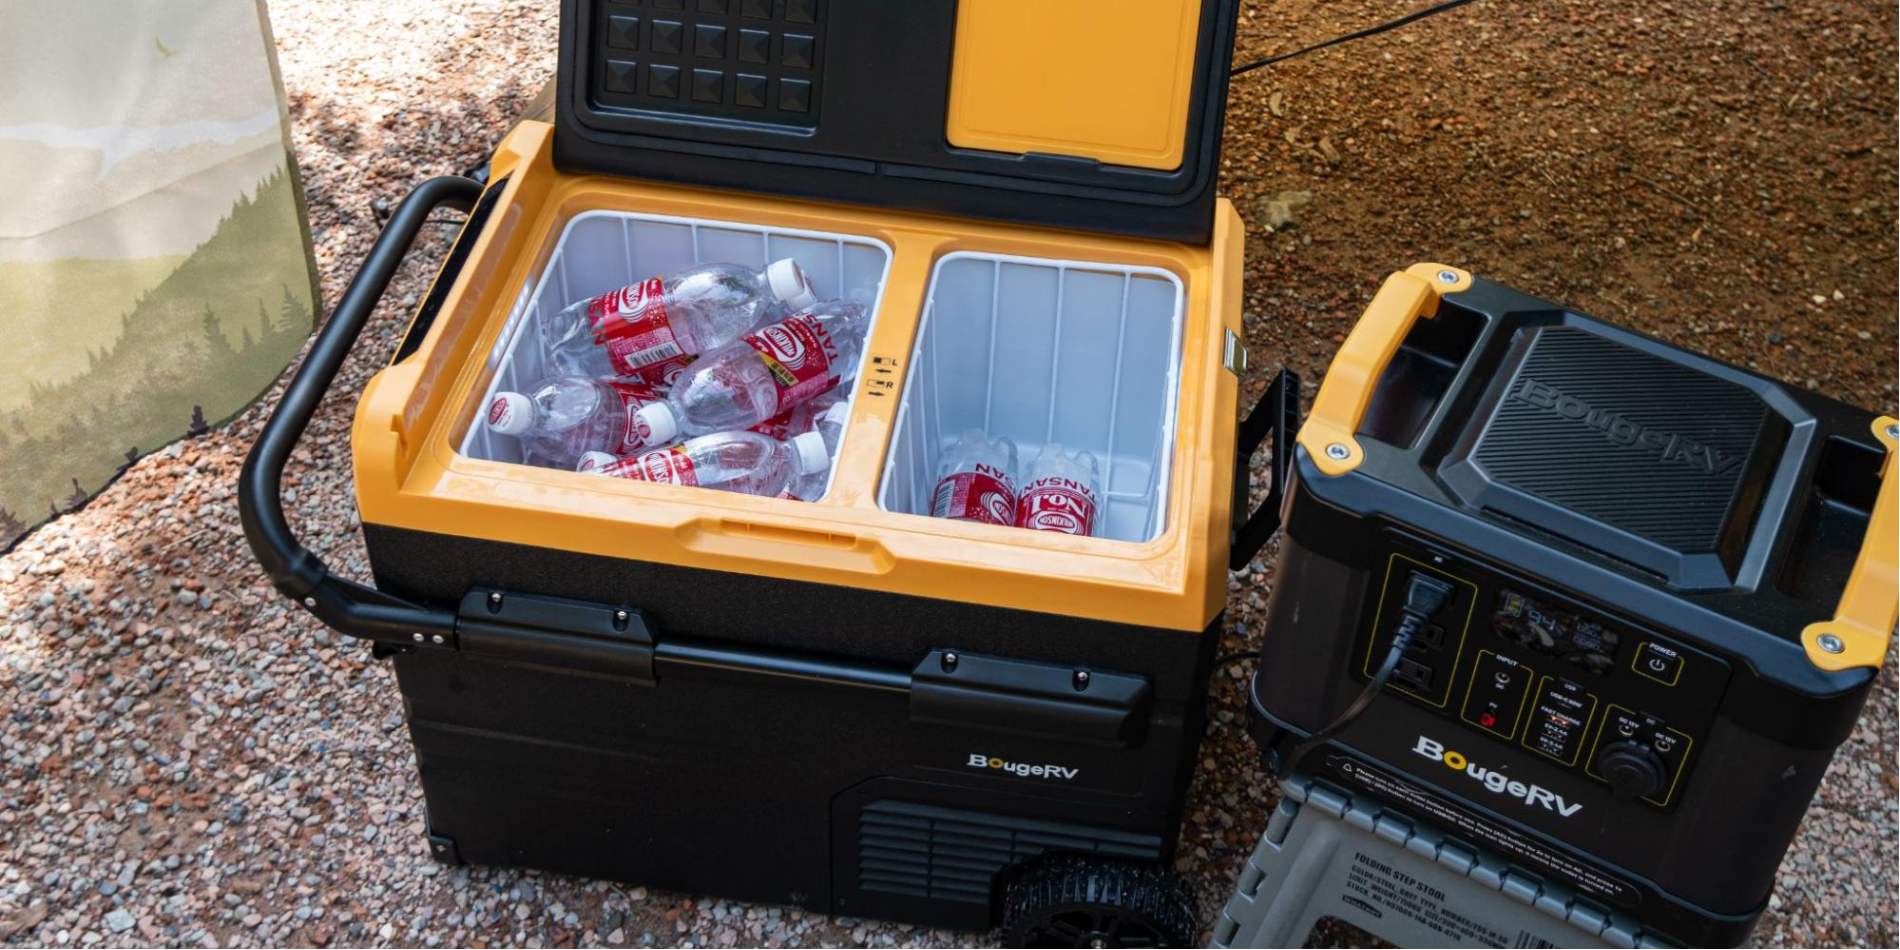 BougeRV’s 12V fridge with BougeRV’s portable power station to keep your food cold without power